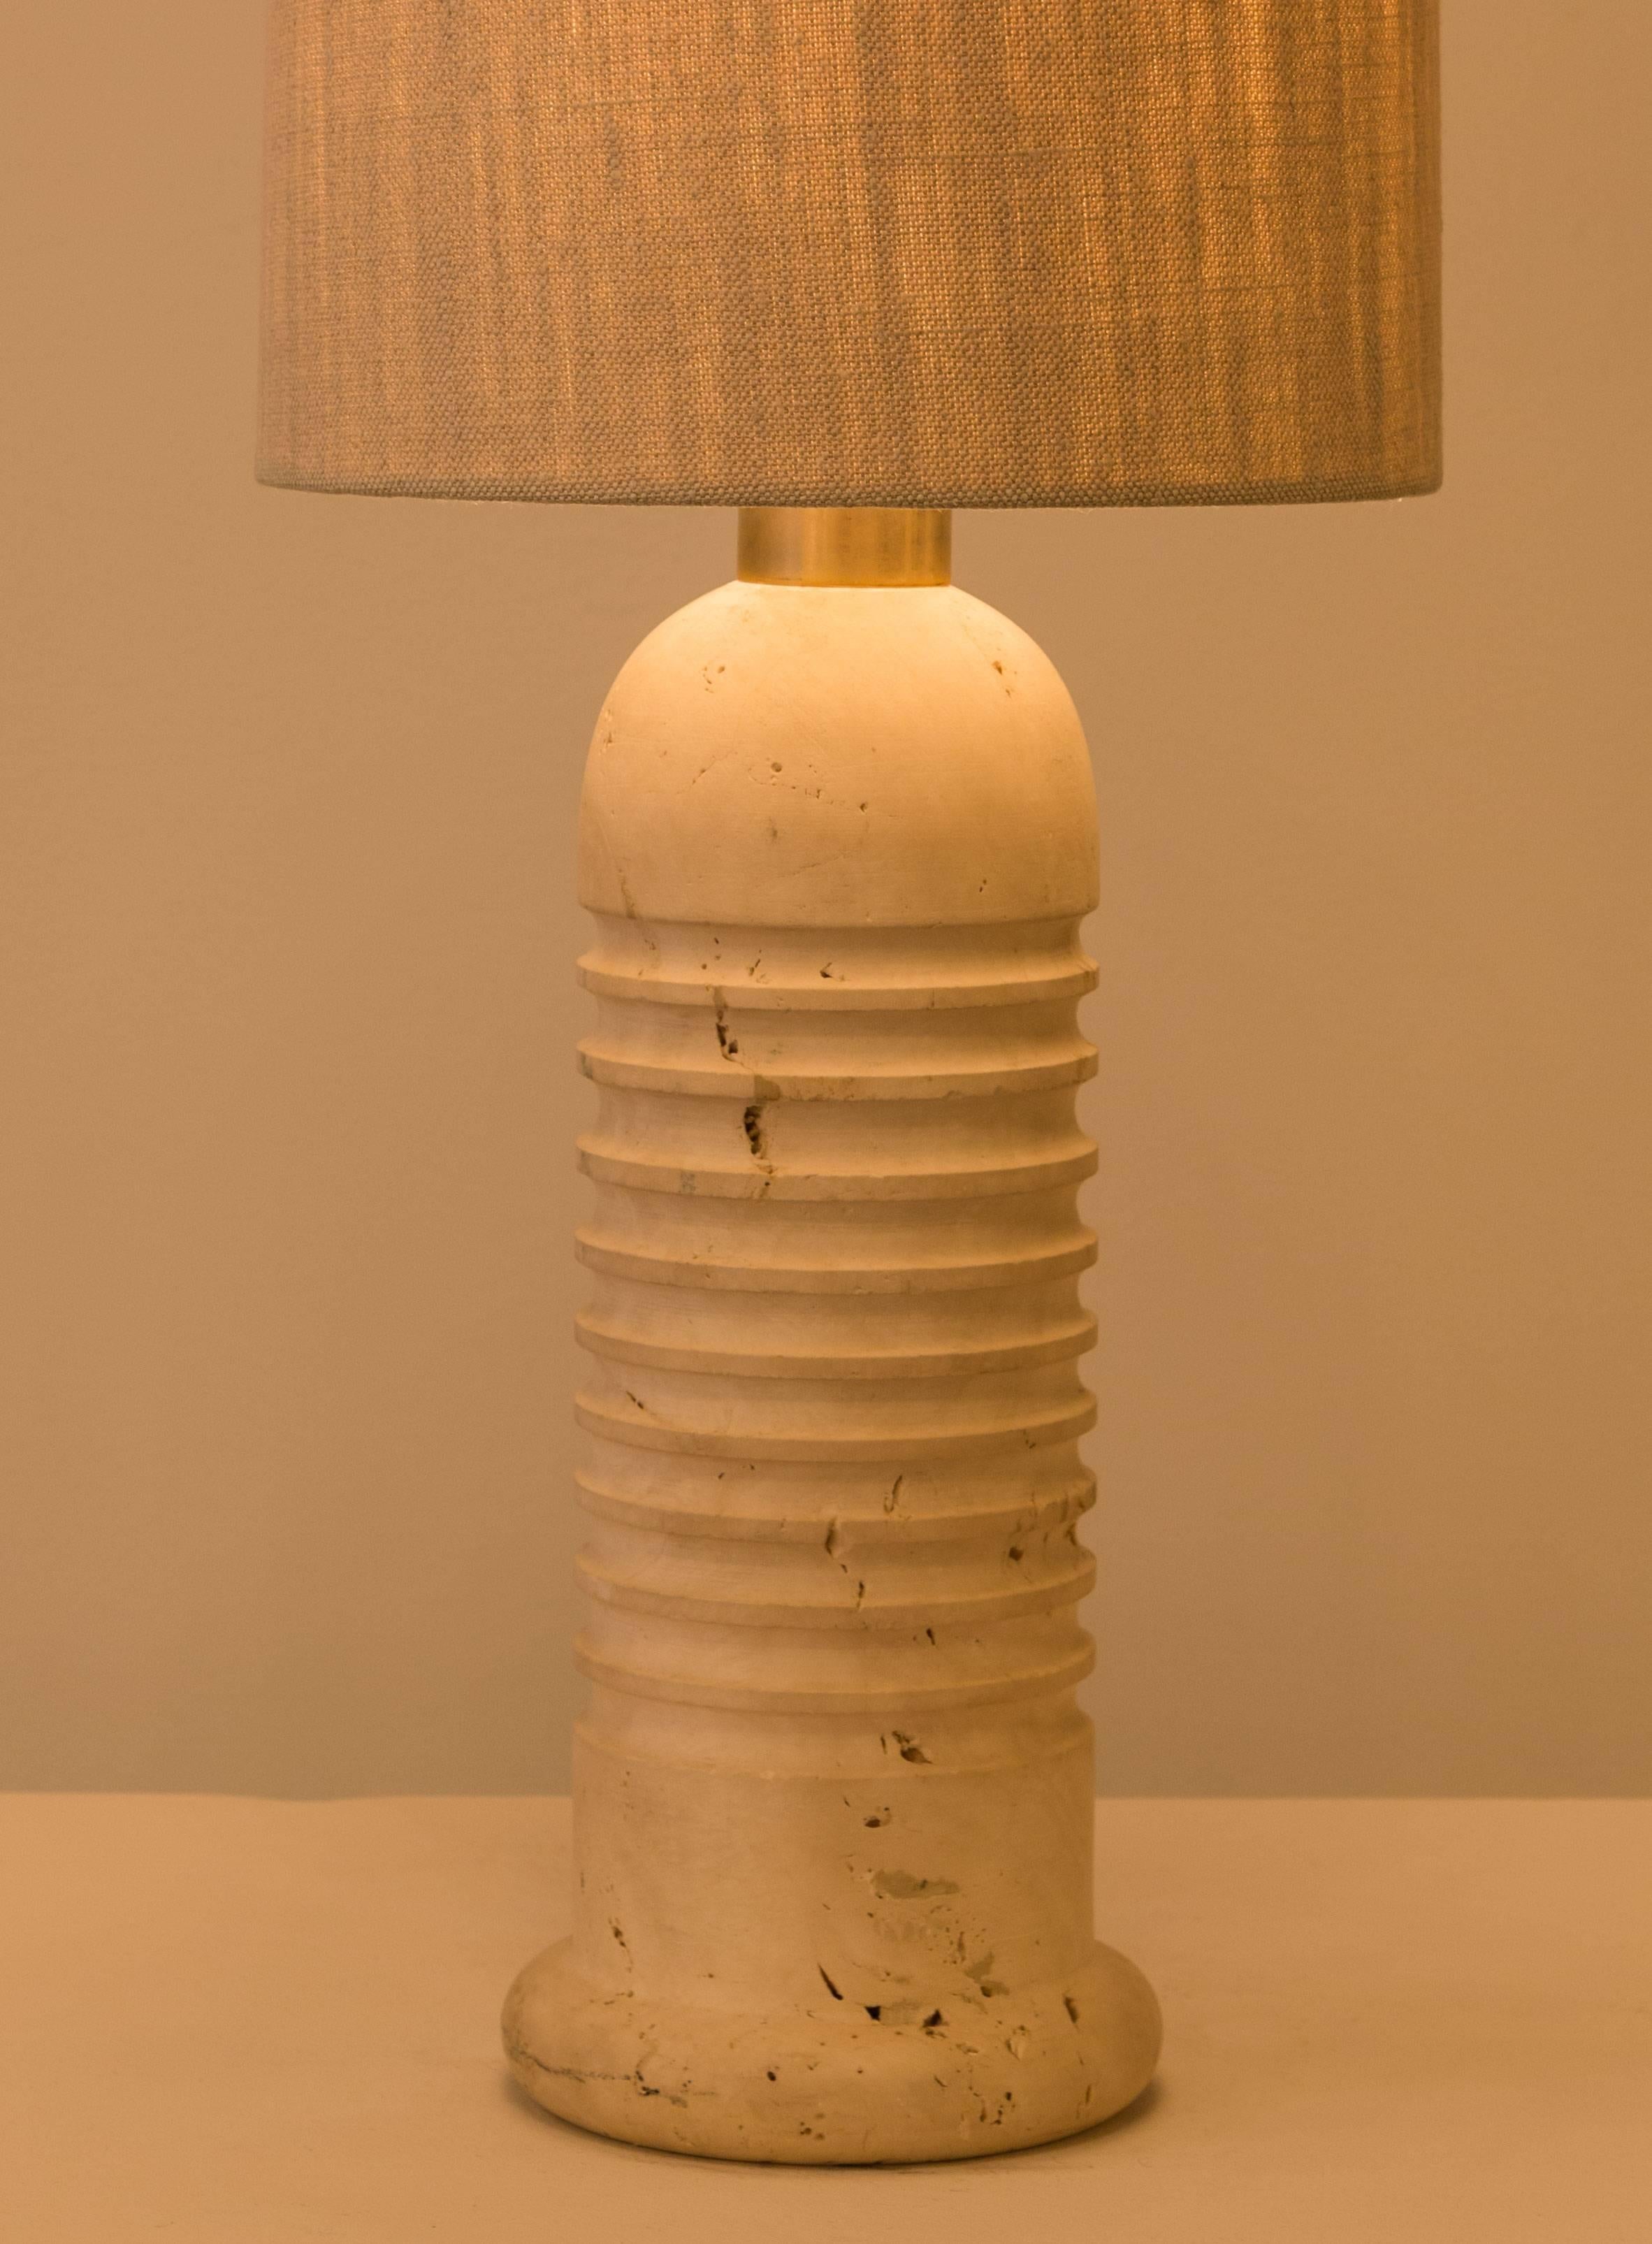 Pair of carved travertine table lamps made in Italy in the 1970s.  Original cords. Takes two E27 75w maximum bulbs per light. Shades not included